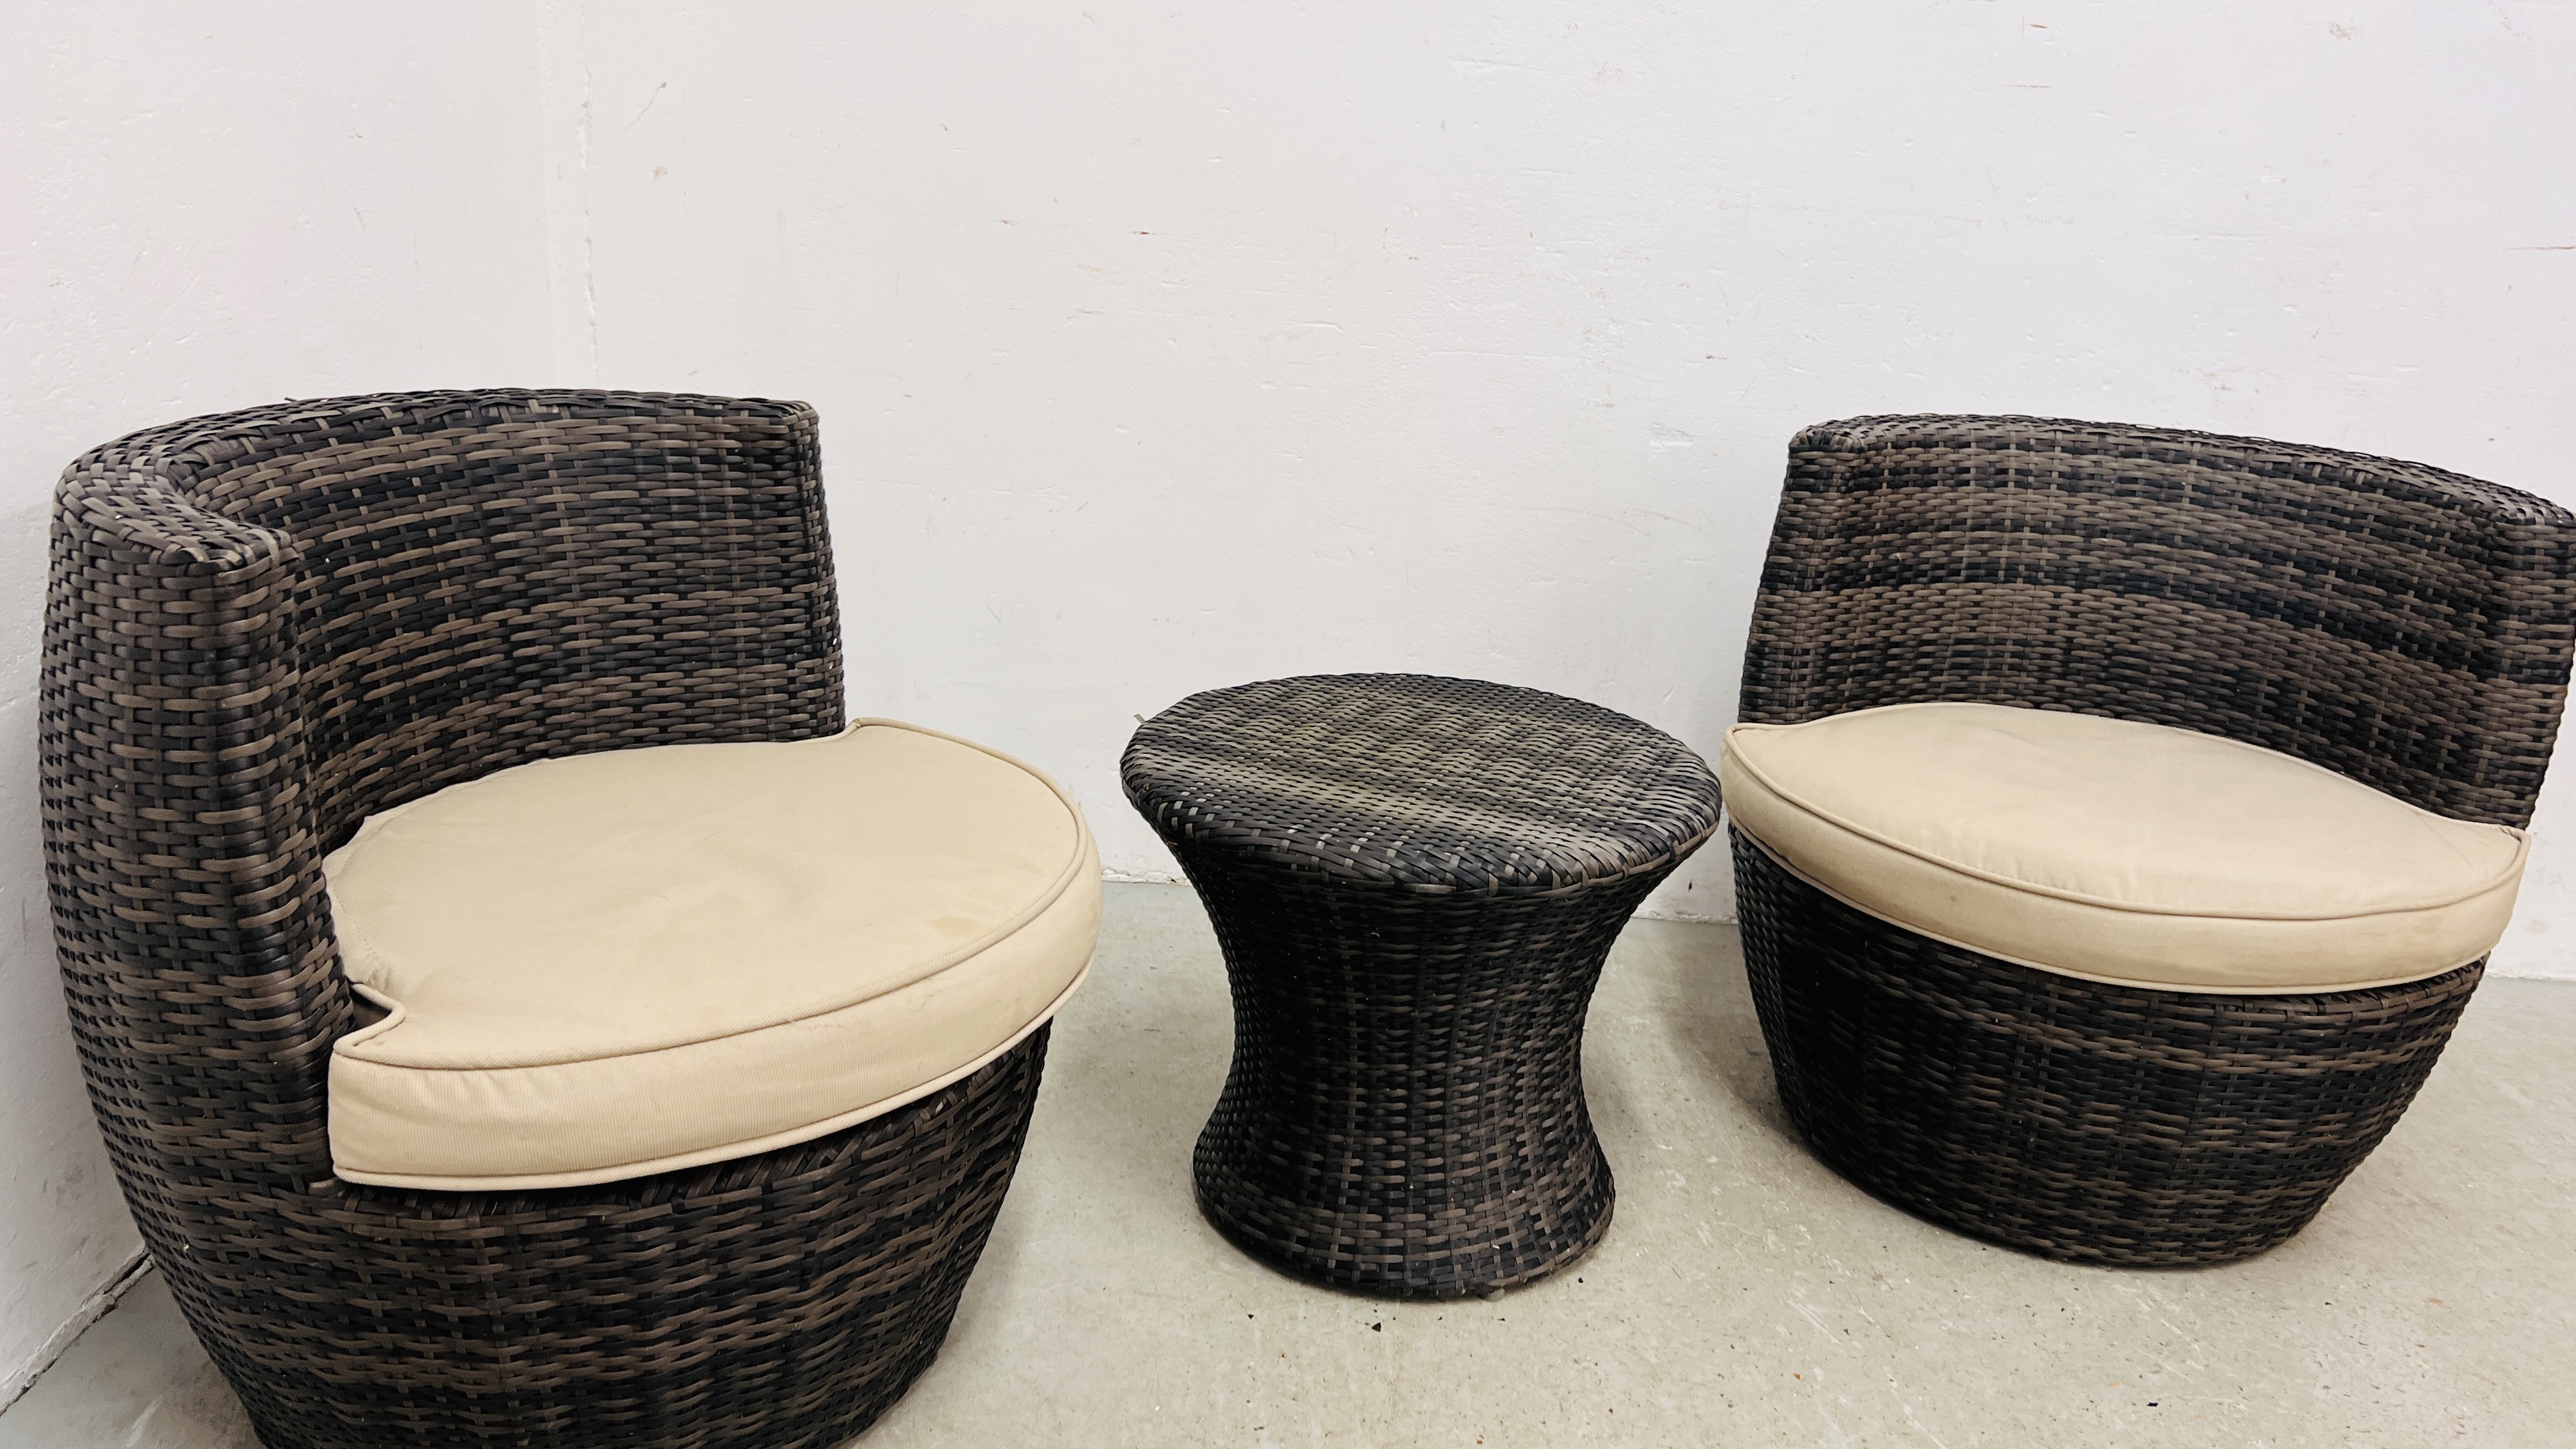 A PAIR OF MODERN GARDEN WOVEN BARREL CHAIRS ALONG WITH A MATCHING CIRCULAR TABLE. - Image 8 of 8